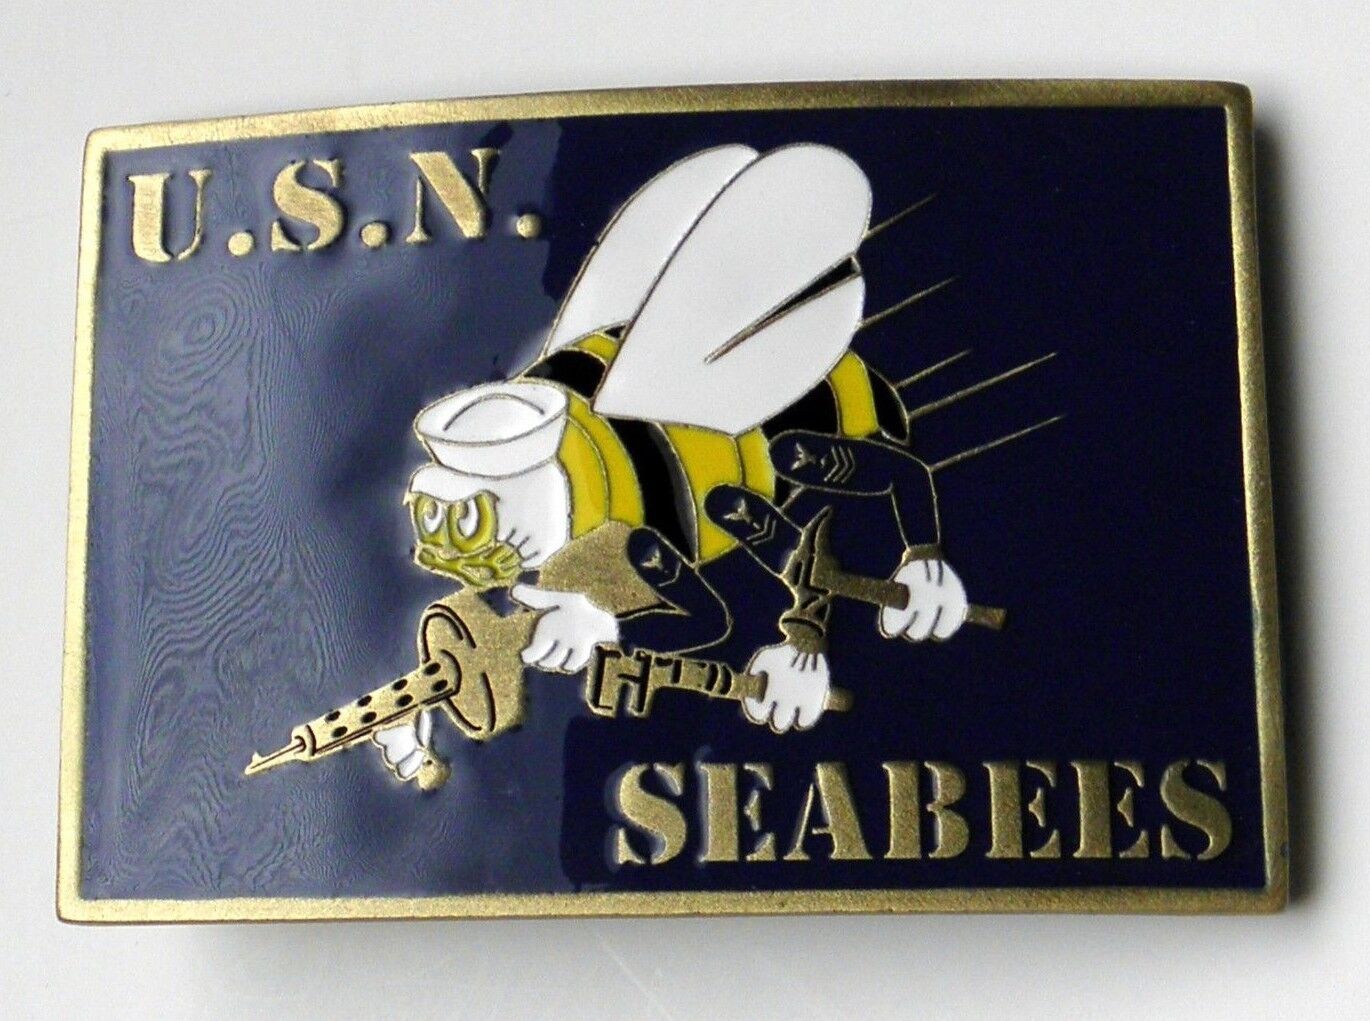 NAVY USN SEABEES BELT BUCKLE 3.1 INCHES SEABEE